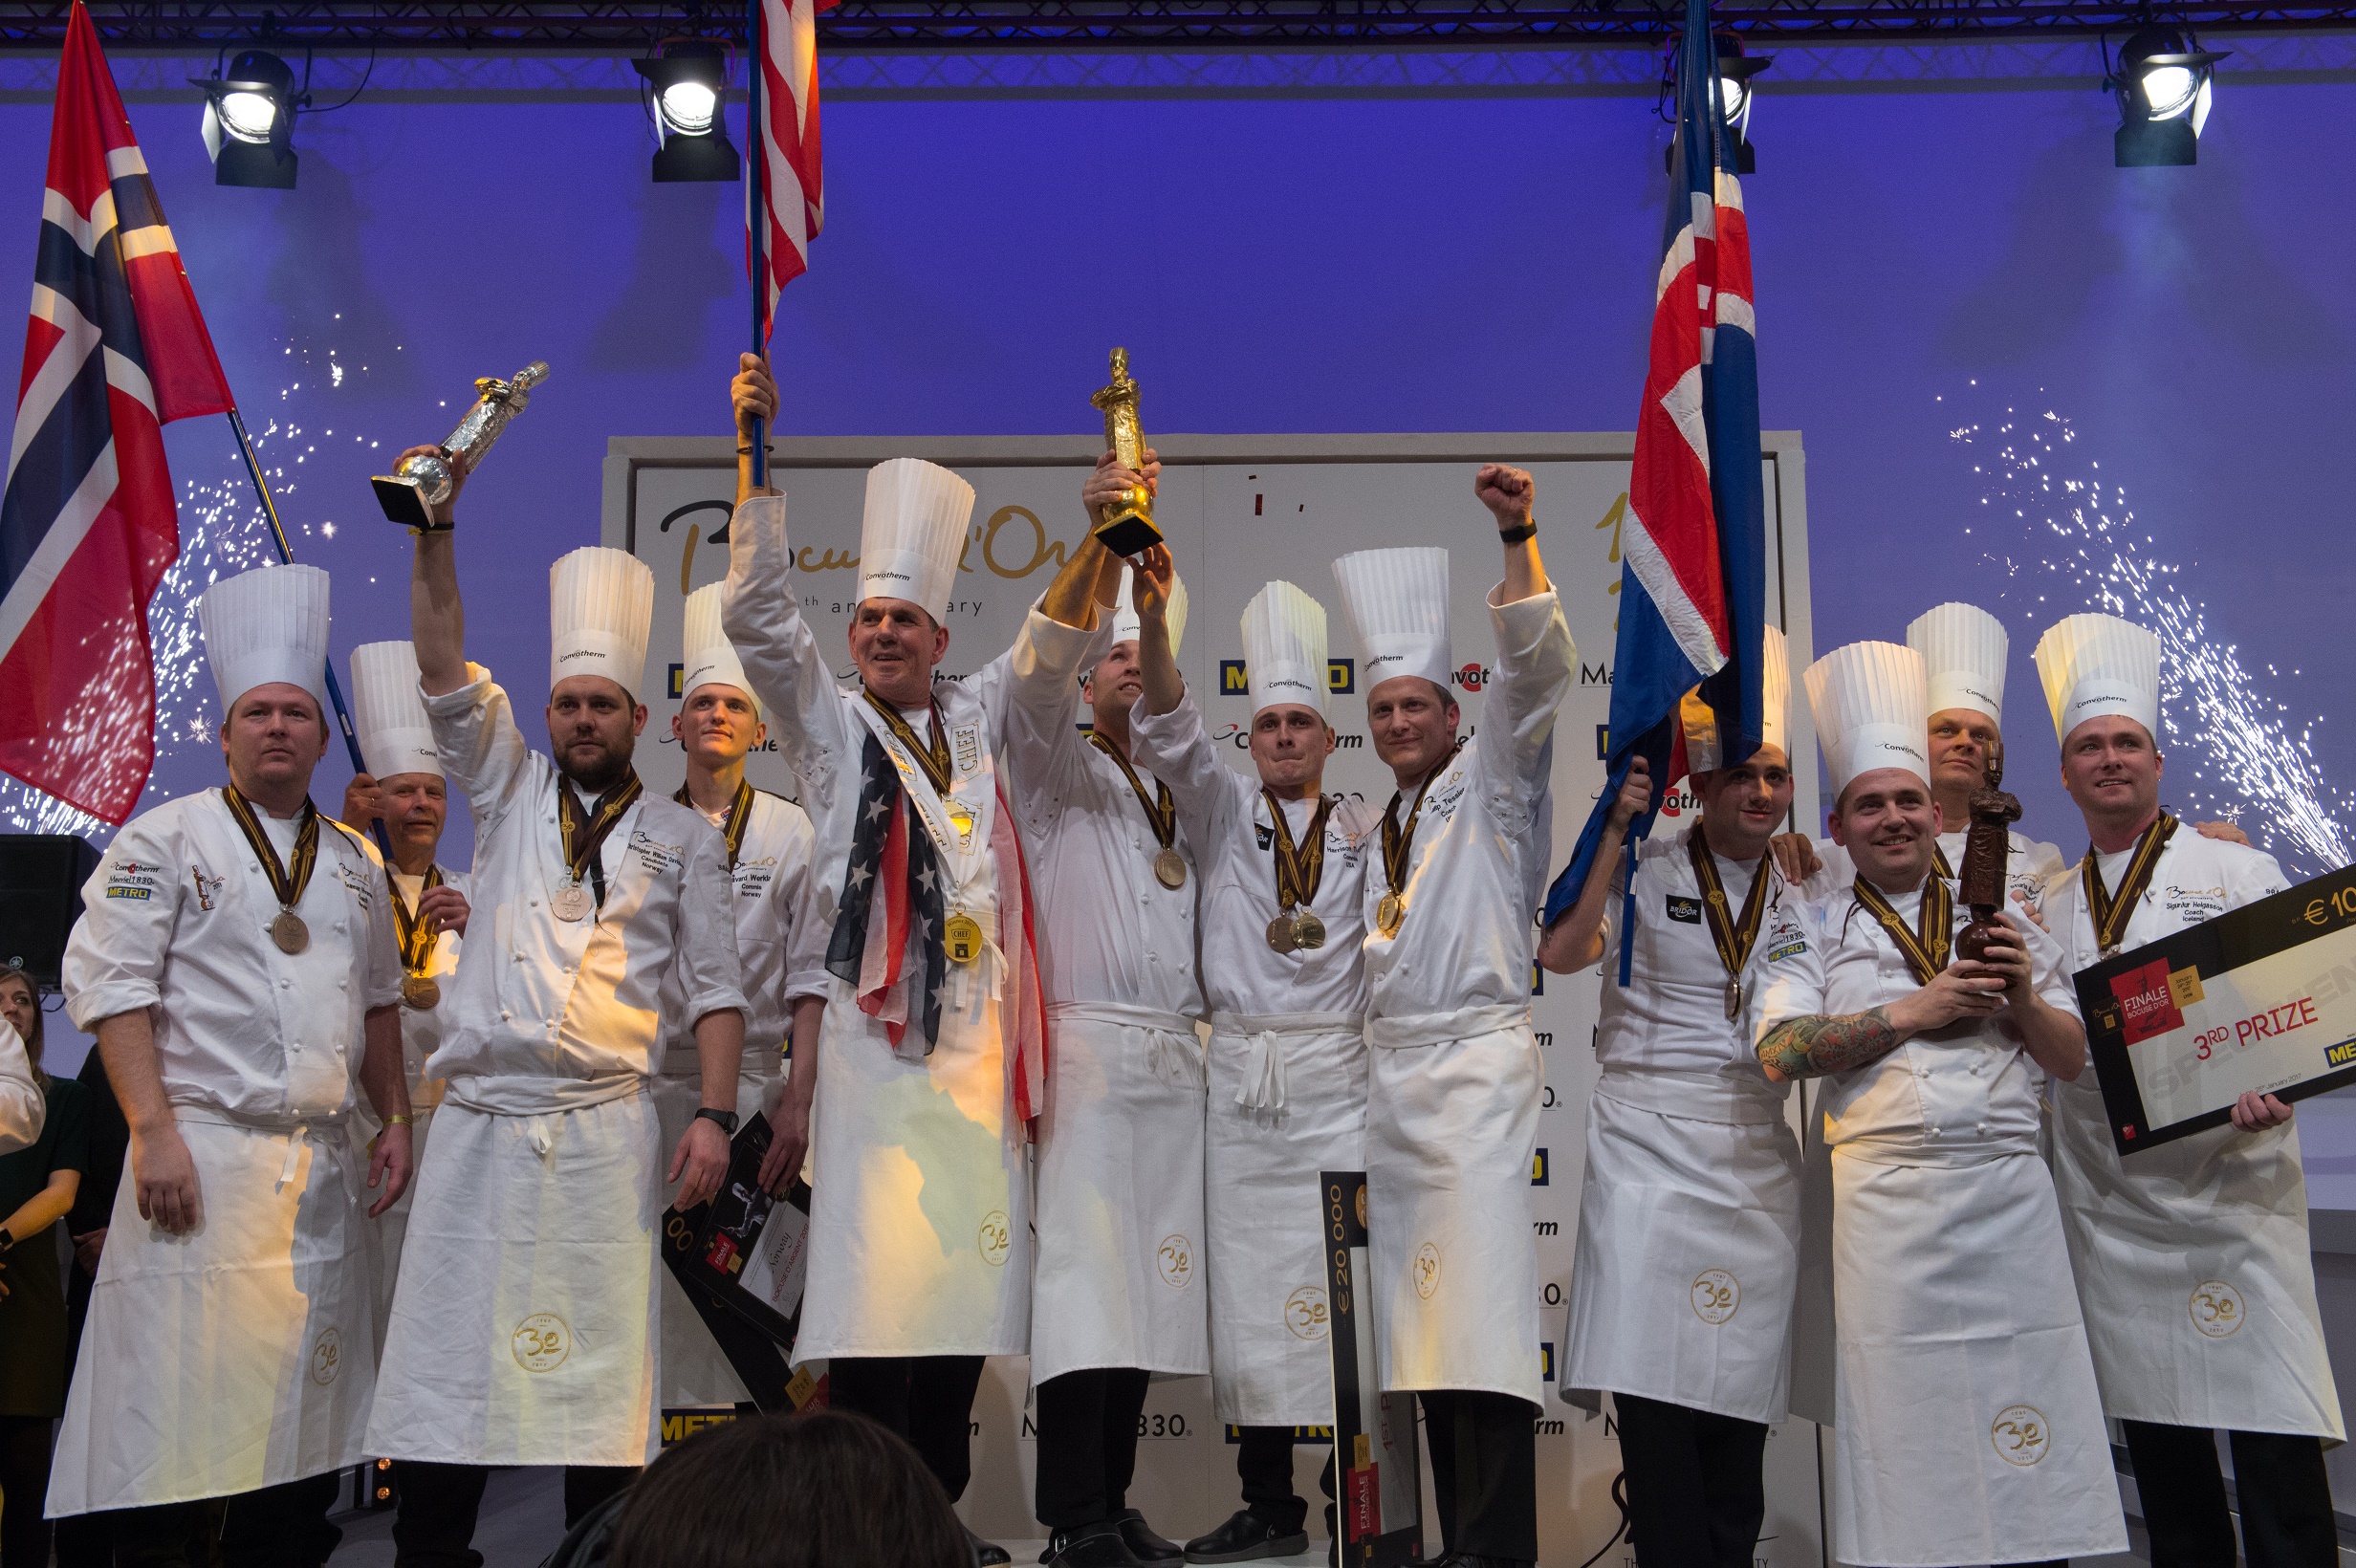 The 2017 Bocuse d'Or winners: Team USA with gold, Norway with Silver and Iceland with Bronze (c) SIRHA